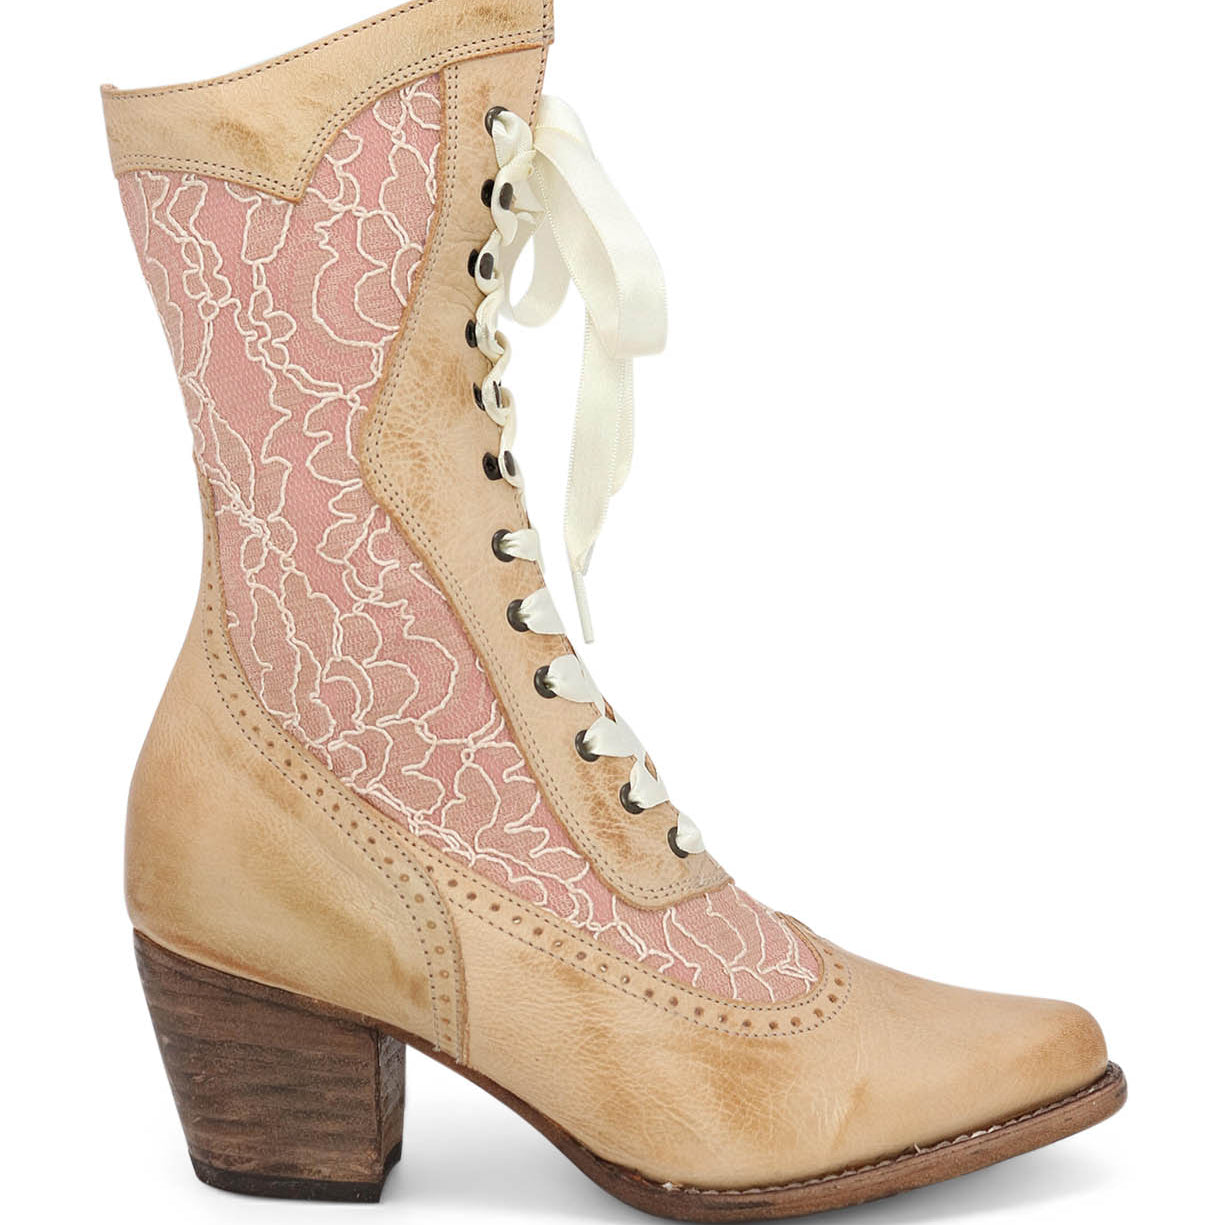 A women's lace-up black leather boot with a wooden heel called Biddy by Oak Tree Farms.